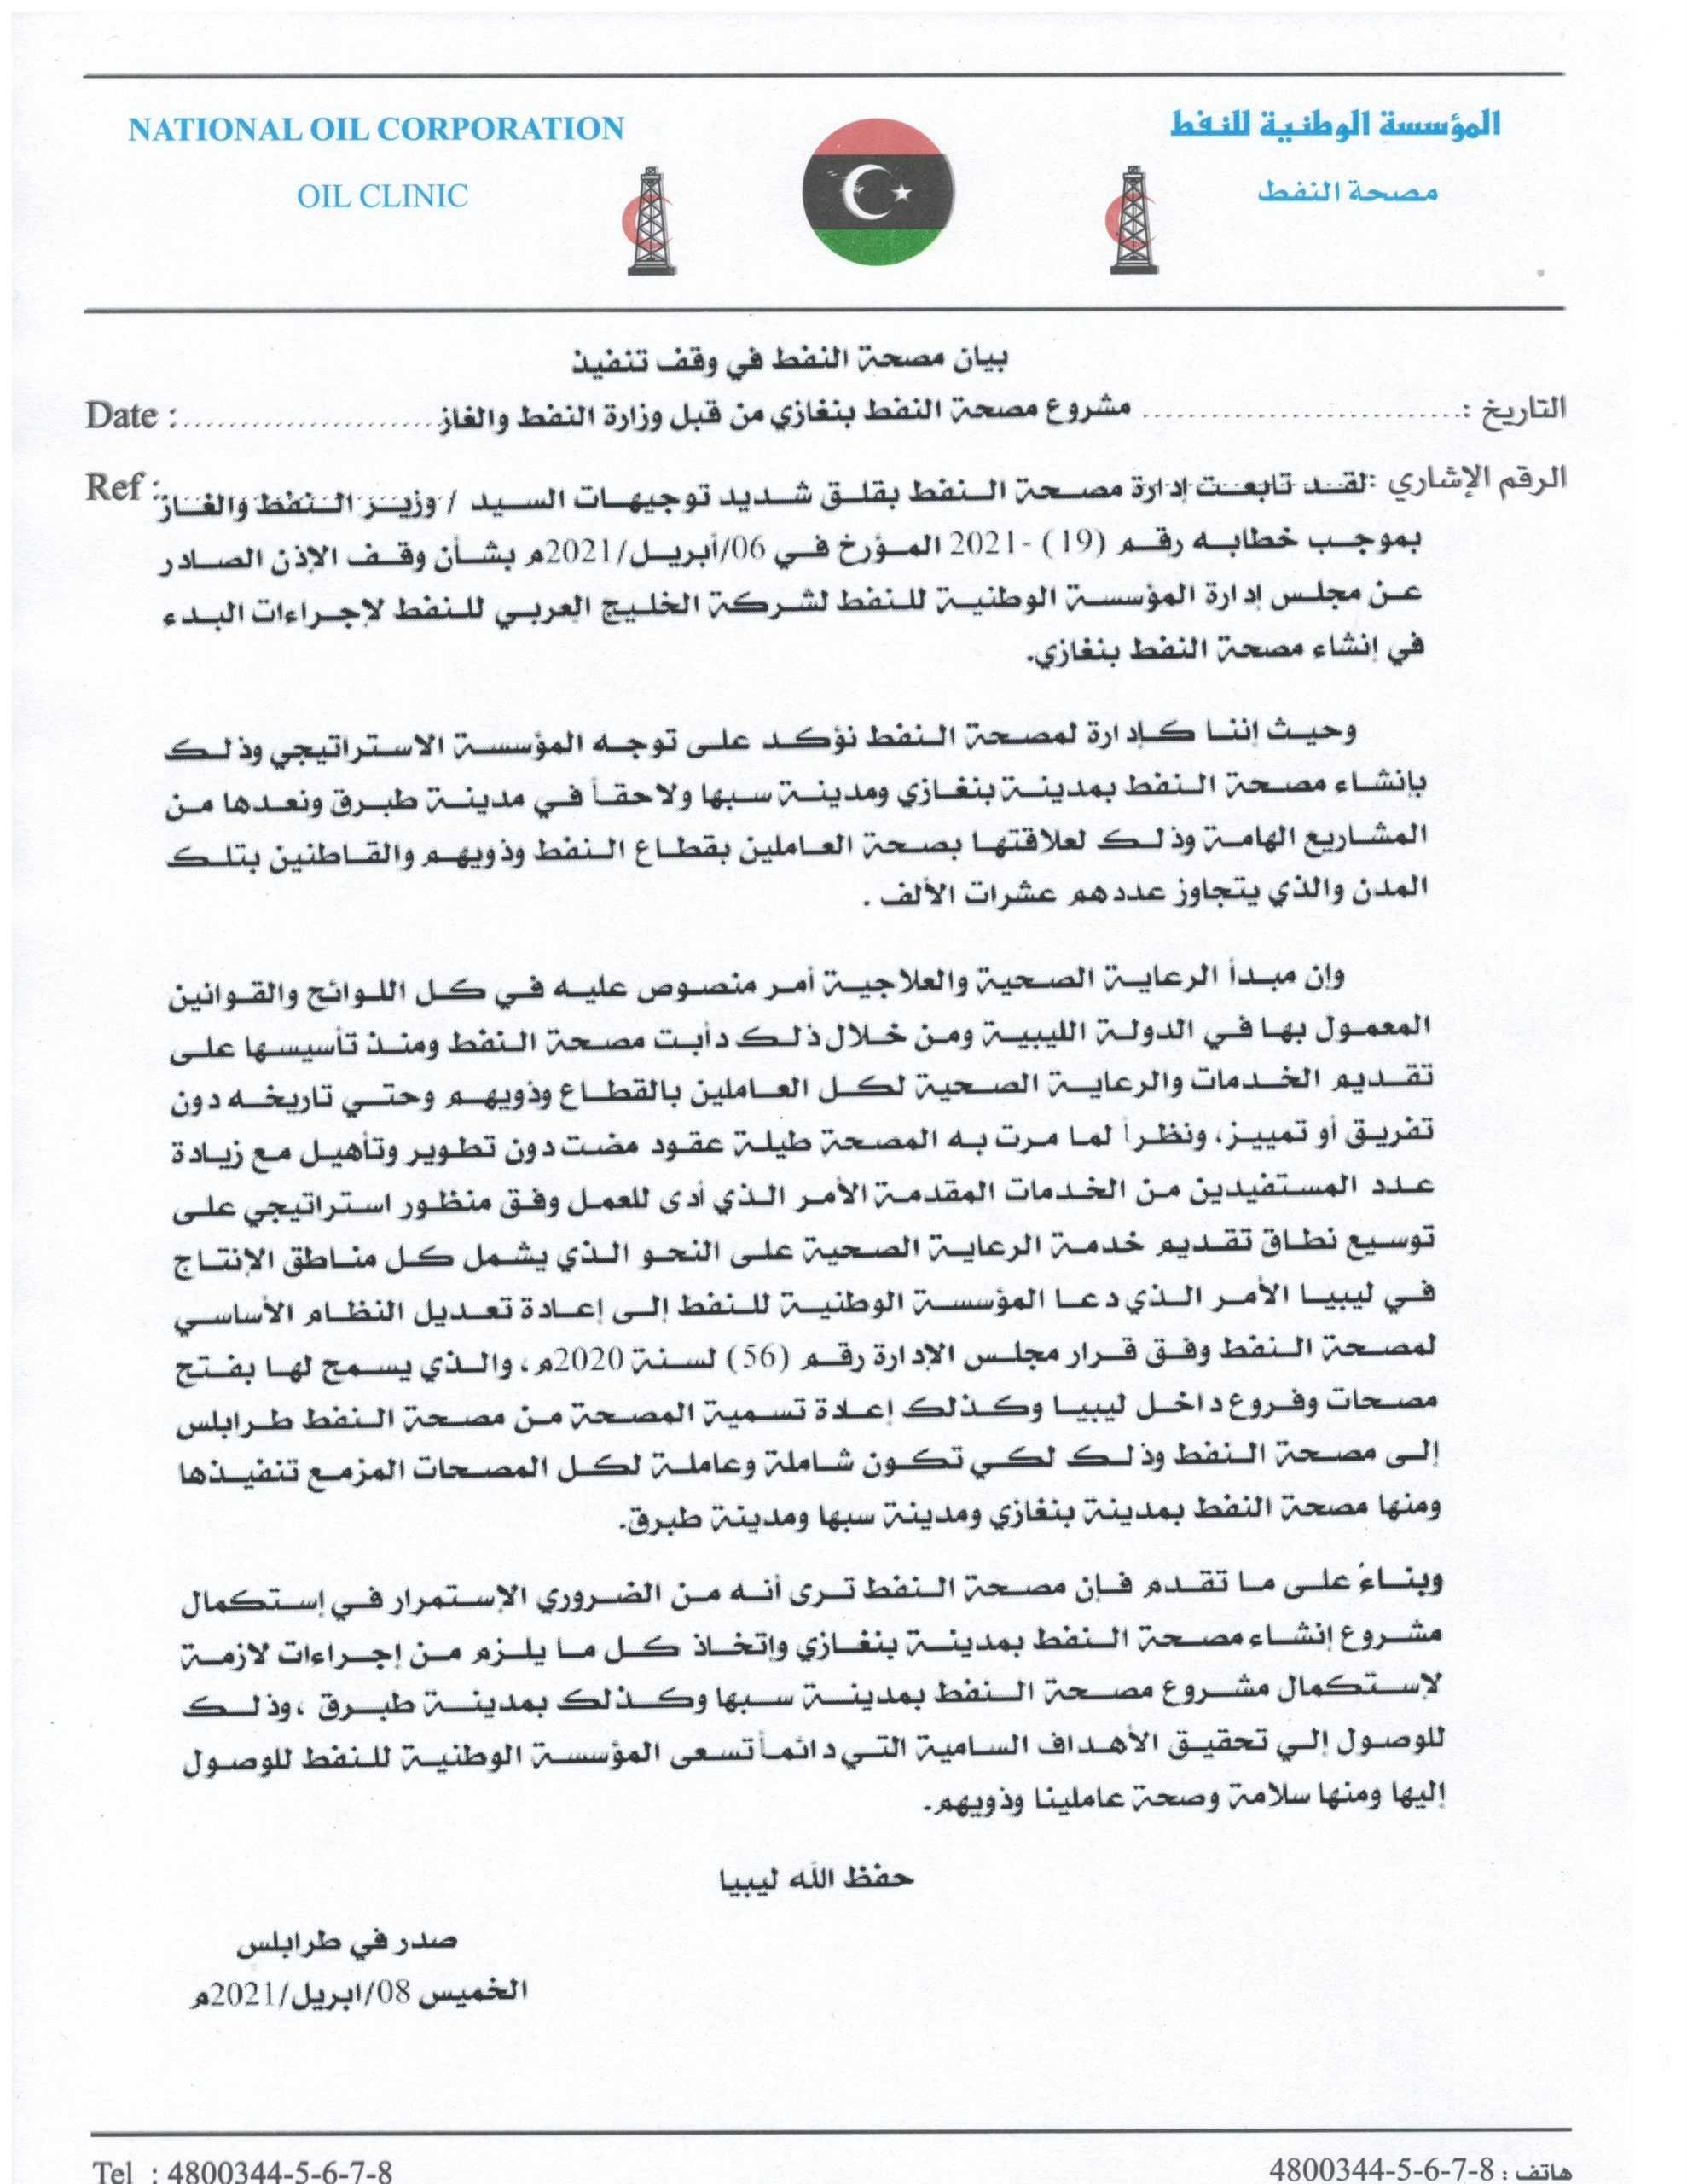 Statement of the oil clinic on stopping the implementation of the Benghazi oil clinic project by the Ministry of Oil and Gas